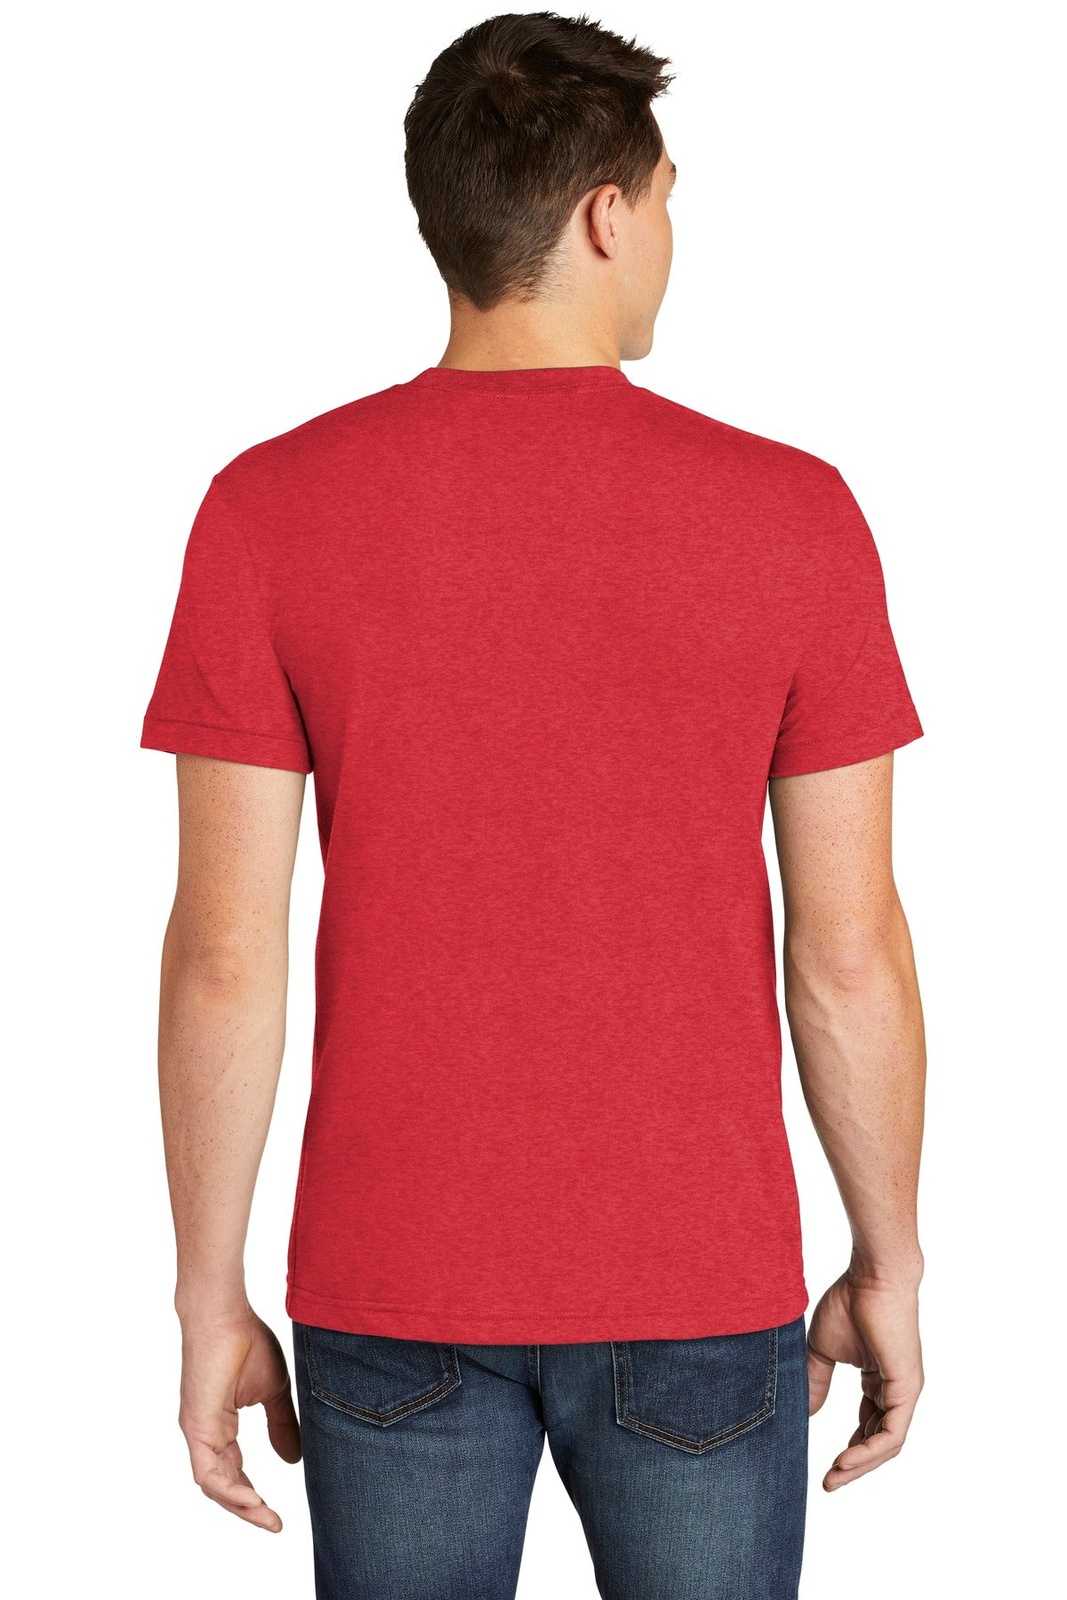 American Apparel BB401W Poly-Cotton T-Shirt - Heather Red - HIT a Double